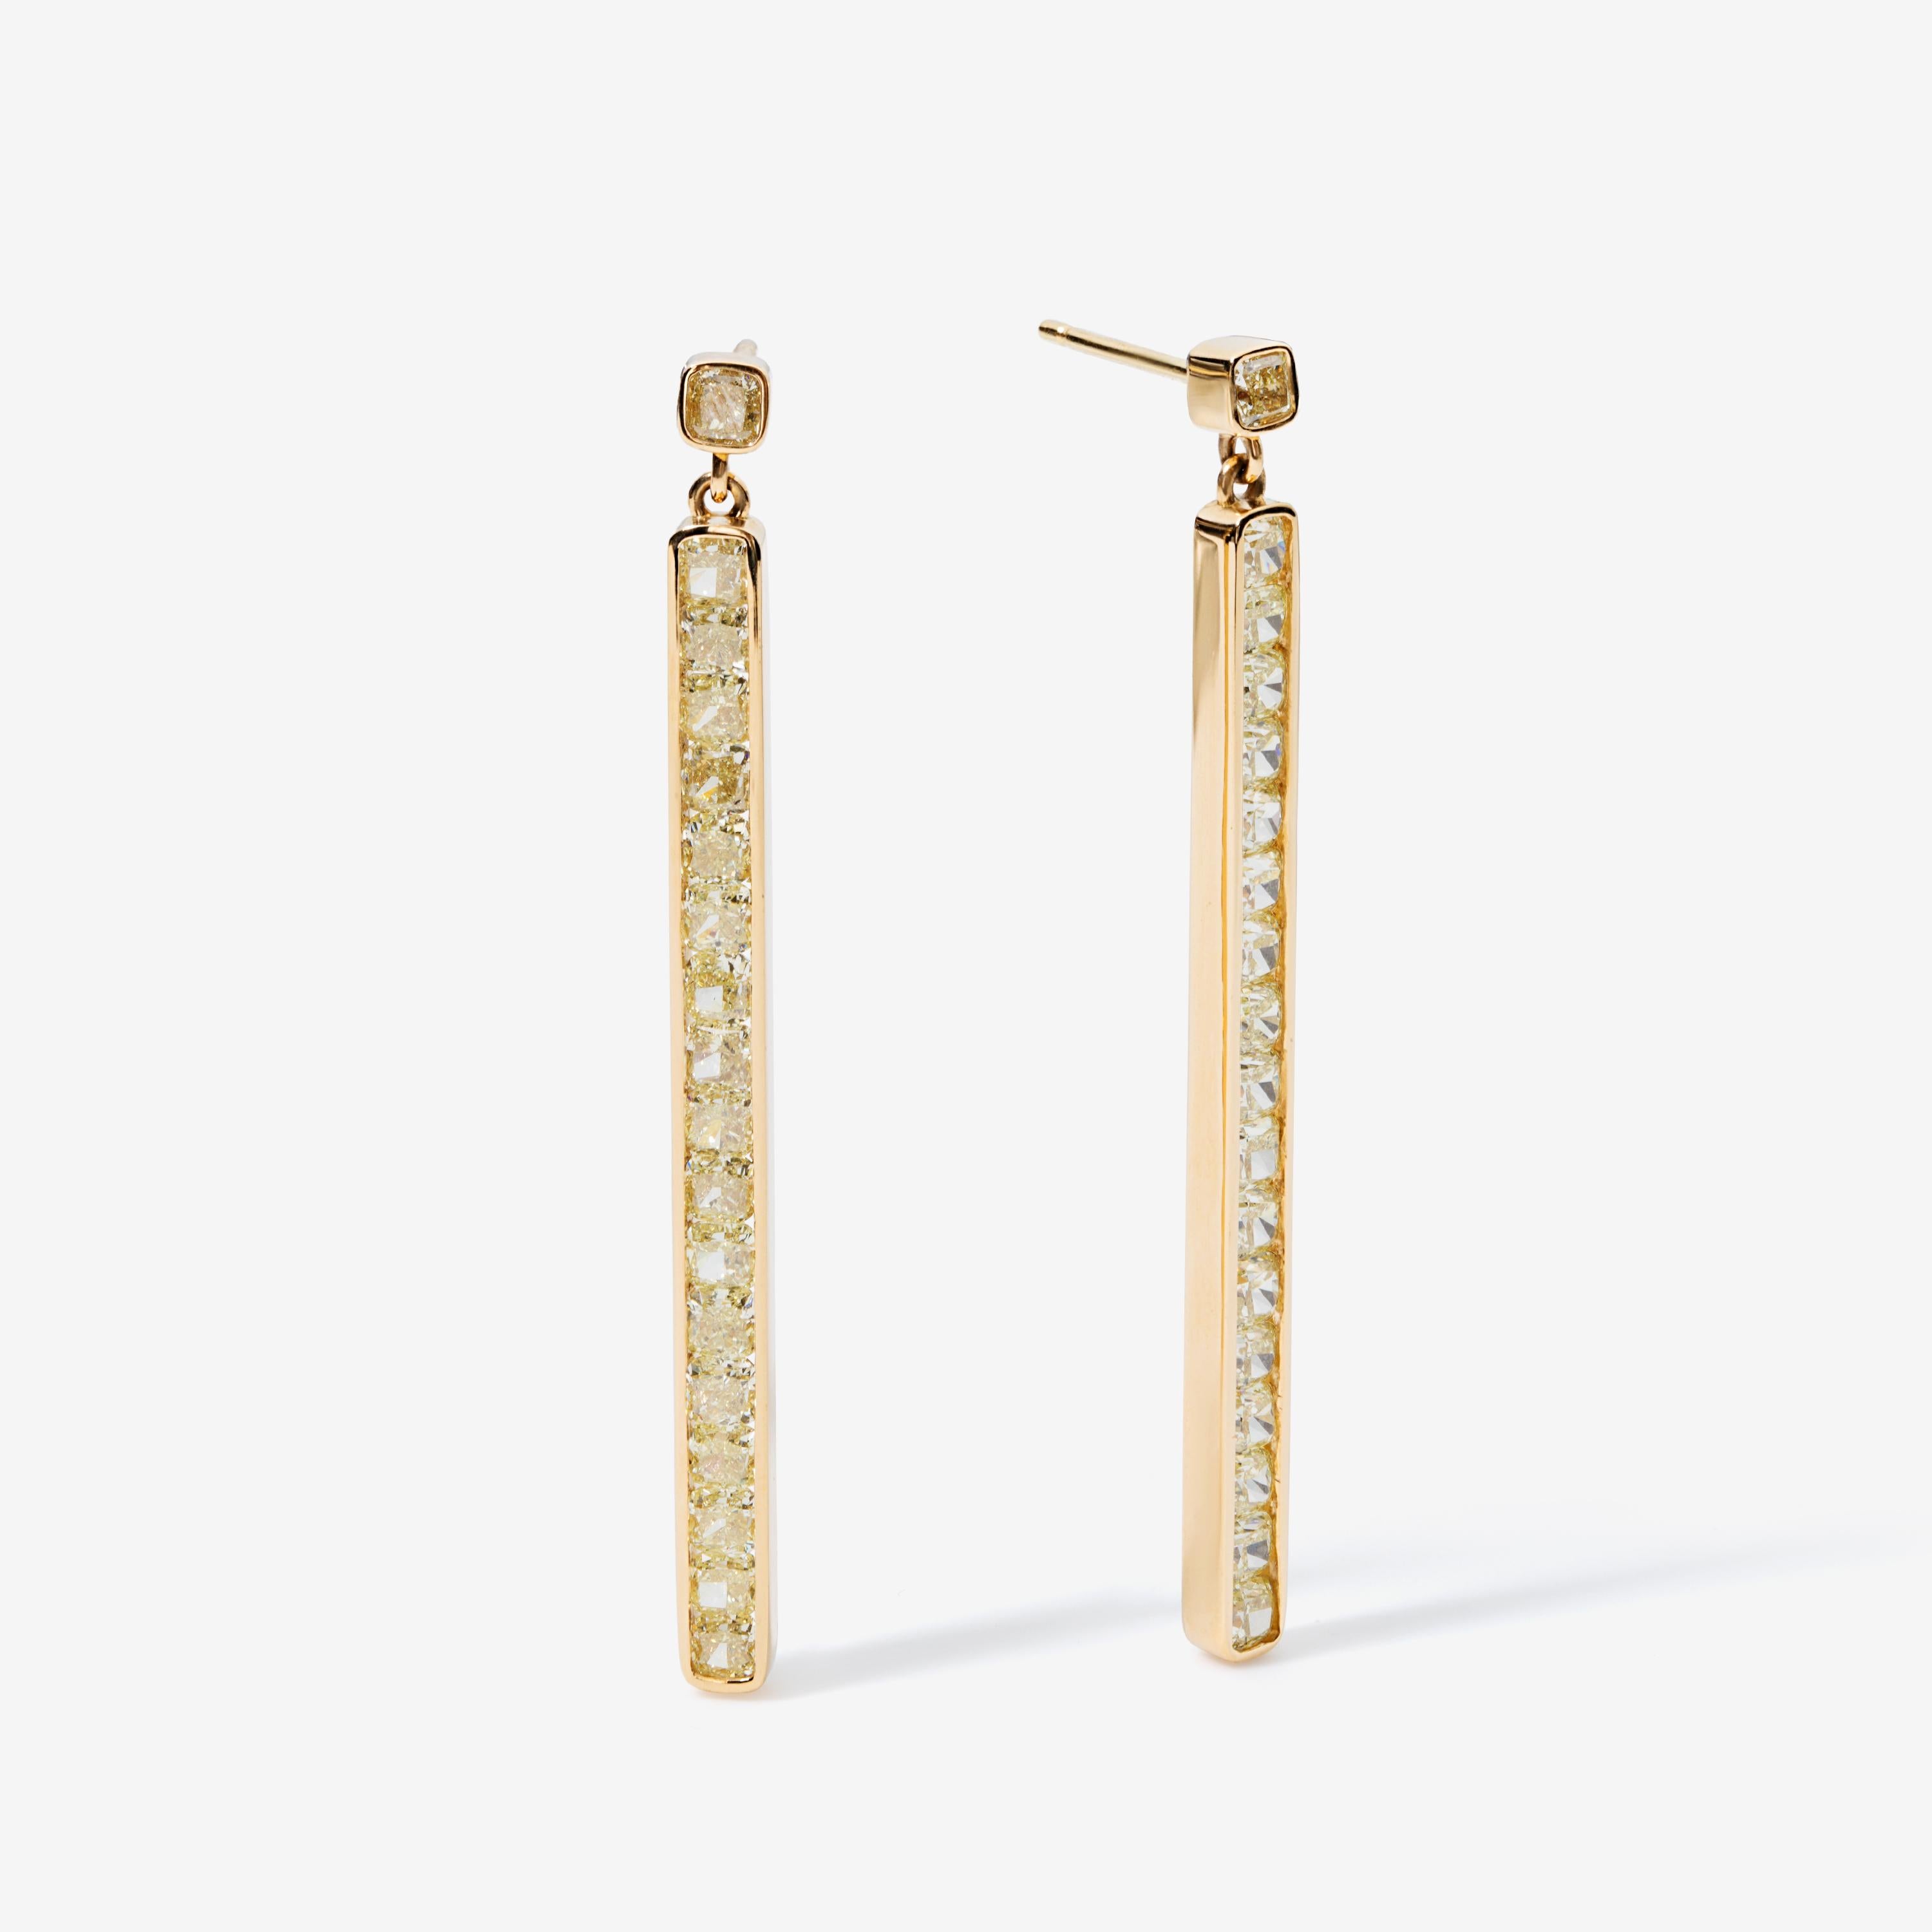 This pair of earrings is crafted from 3.85 carats of cushion-cut fancy yellow natural diamonds. The stones are channel-set in 18k yellow gold to emphasize their warm glow.

Versatile and sophisticated, these yellow diamonds are understated luxury at